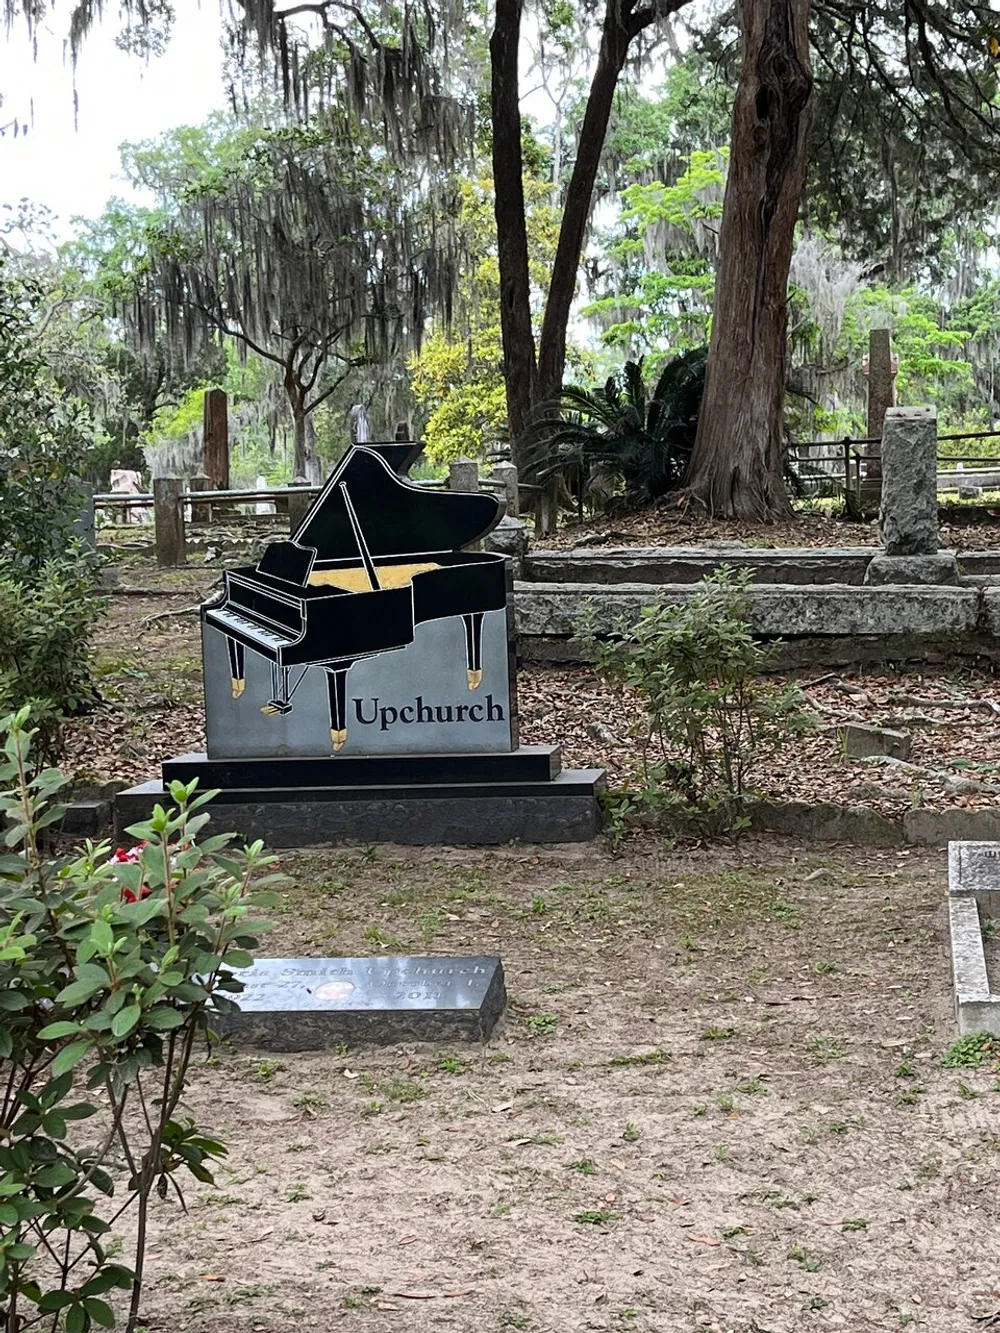 The image features a unique piano-shaped headstone with the name Upchurch in a peaceful tree-laden cemetery